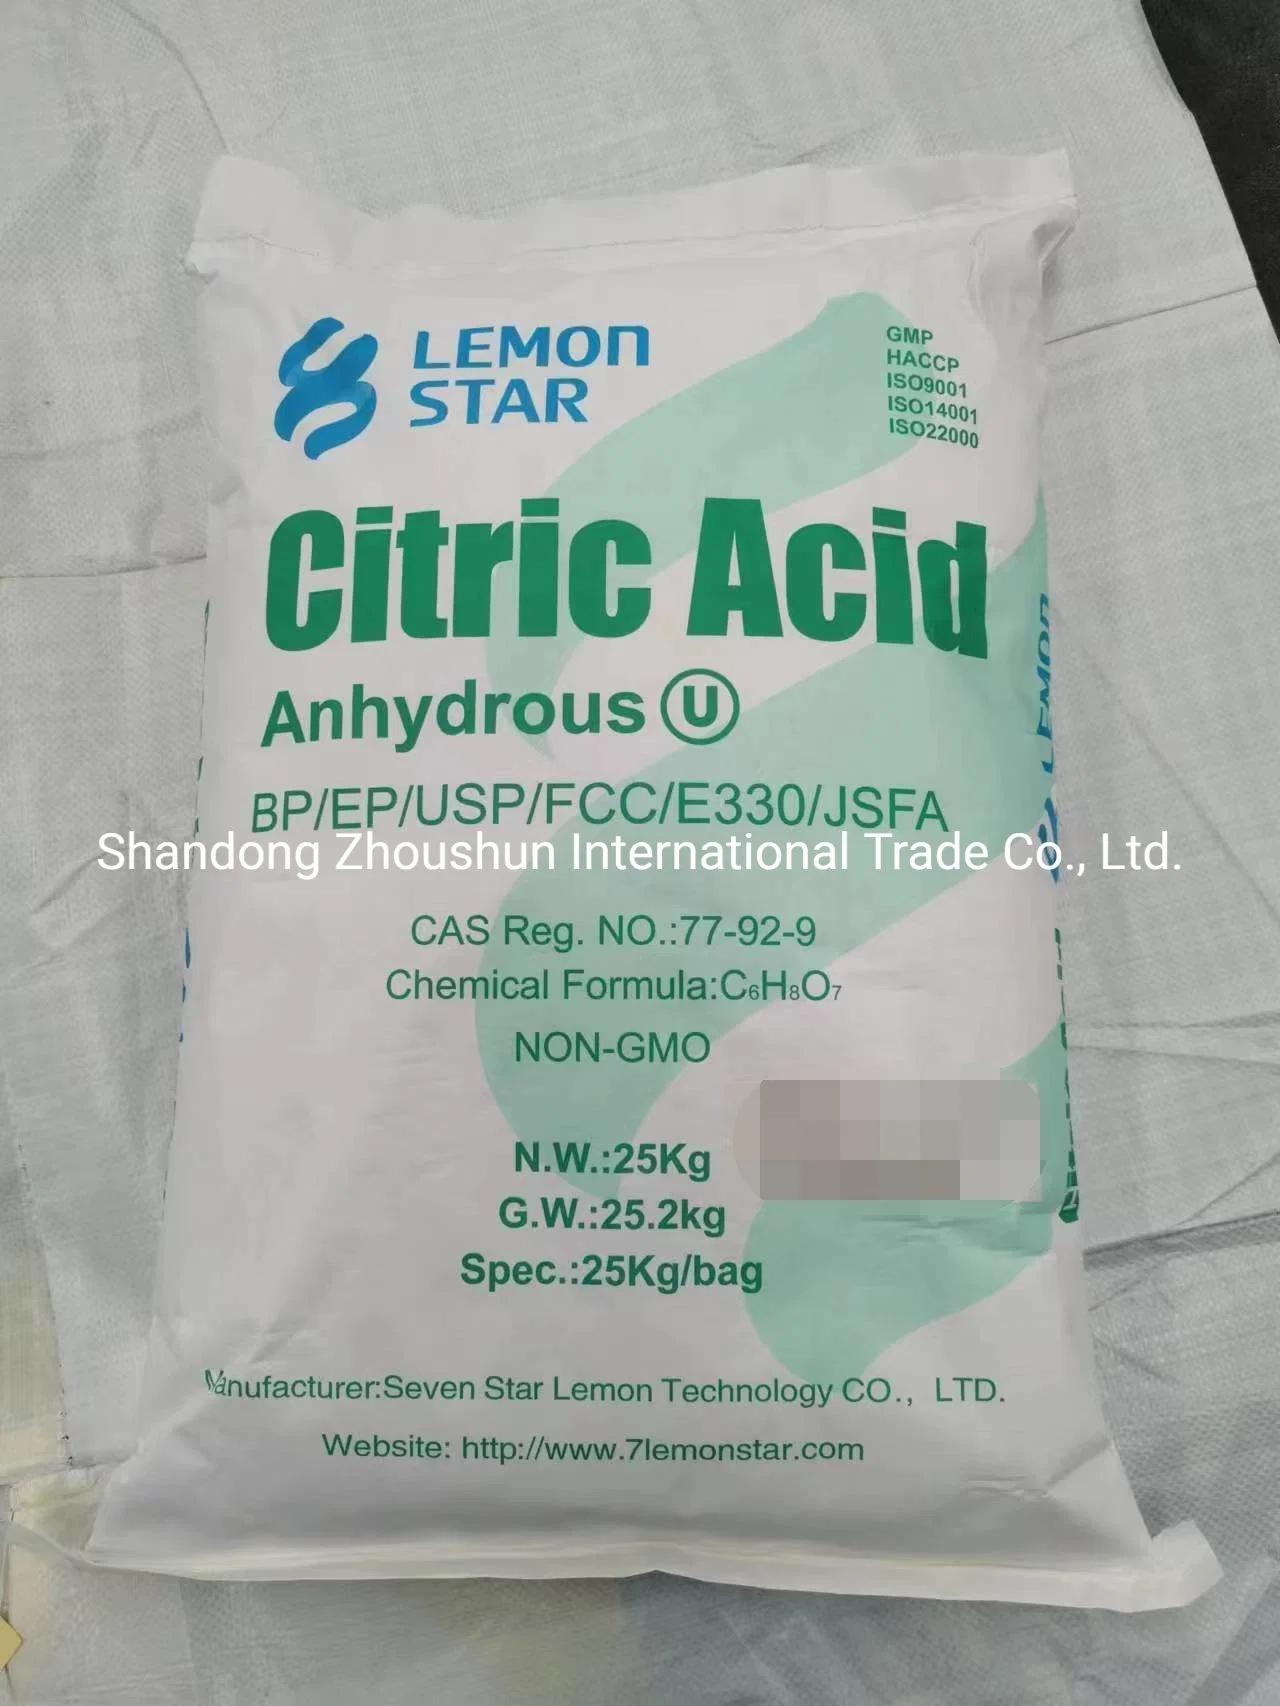 Food & Beverage Additives Best Price for Bulk Bp98 E330 Citric Acid Anhydrous 30-100 Mesh 10-40 Mesh and Citric Acid Monohydrate